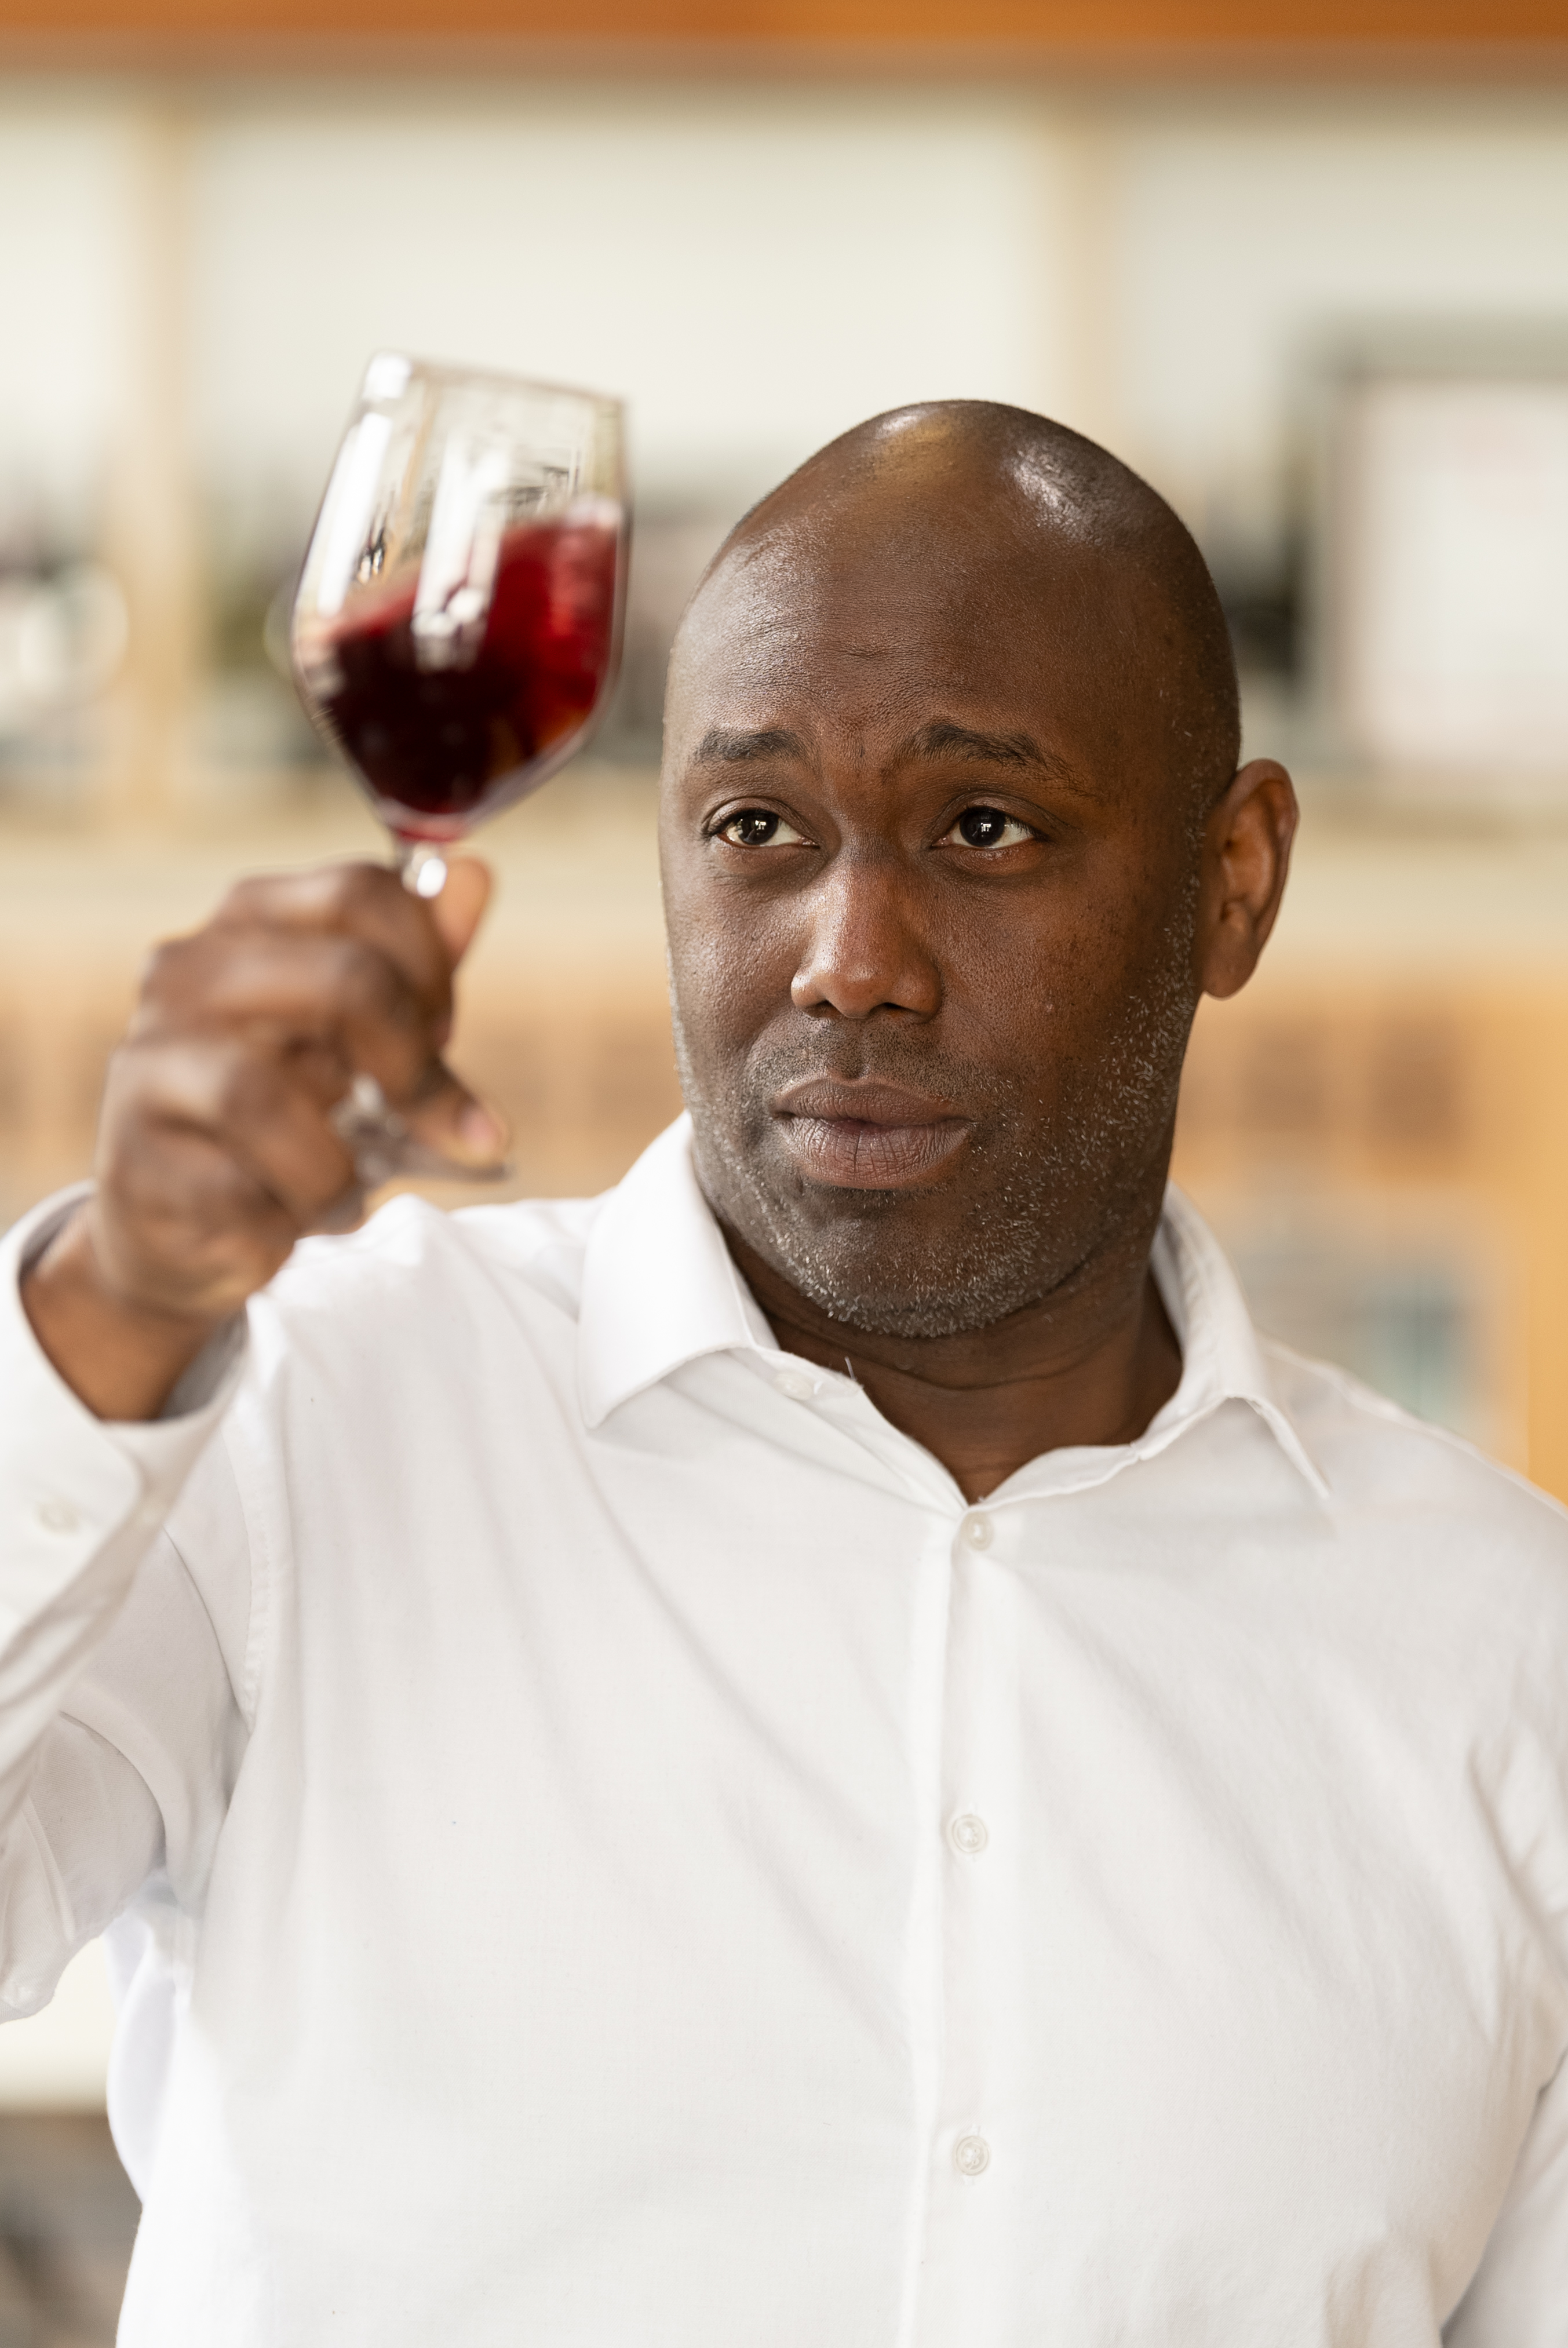 Jerome Price in the Northwest Wine Academy swirling a glass of wine.